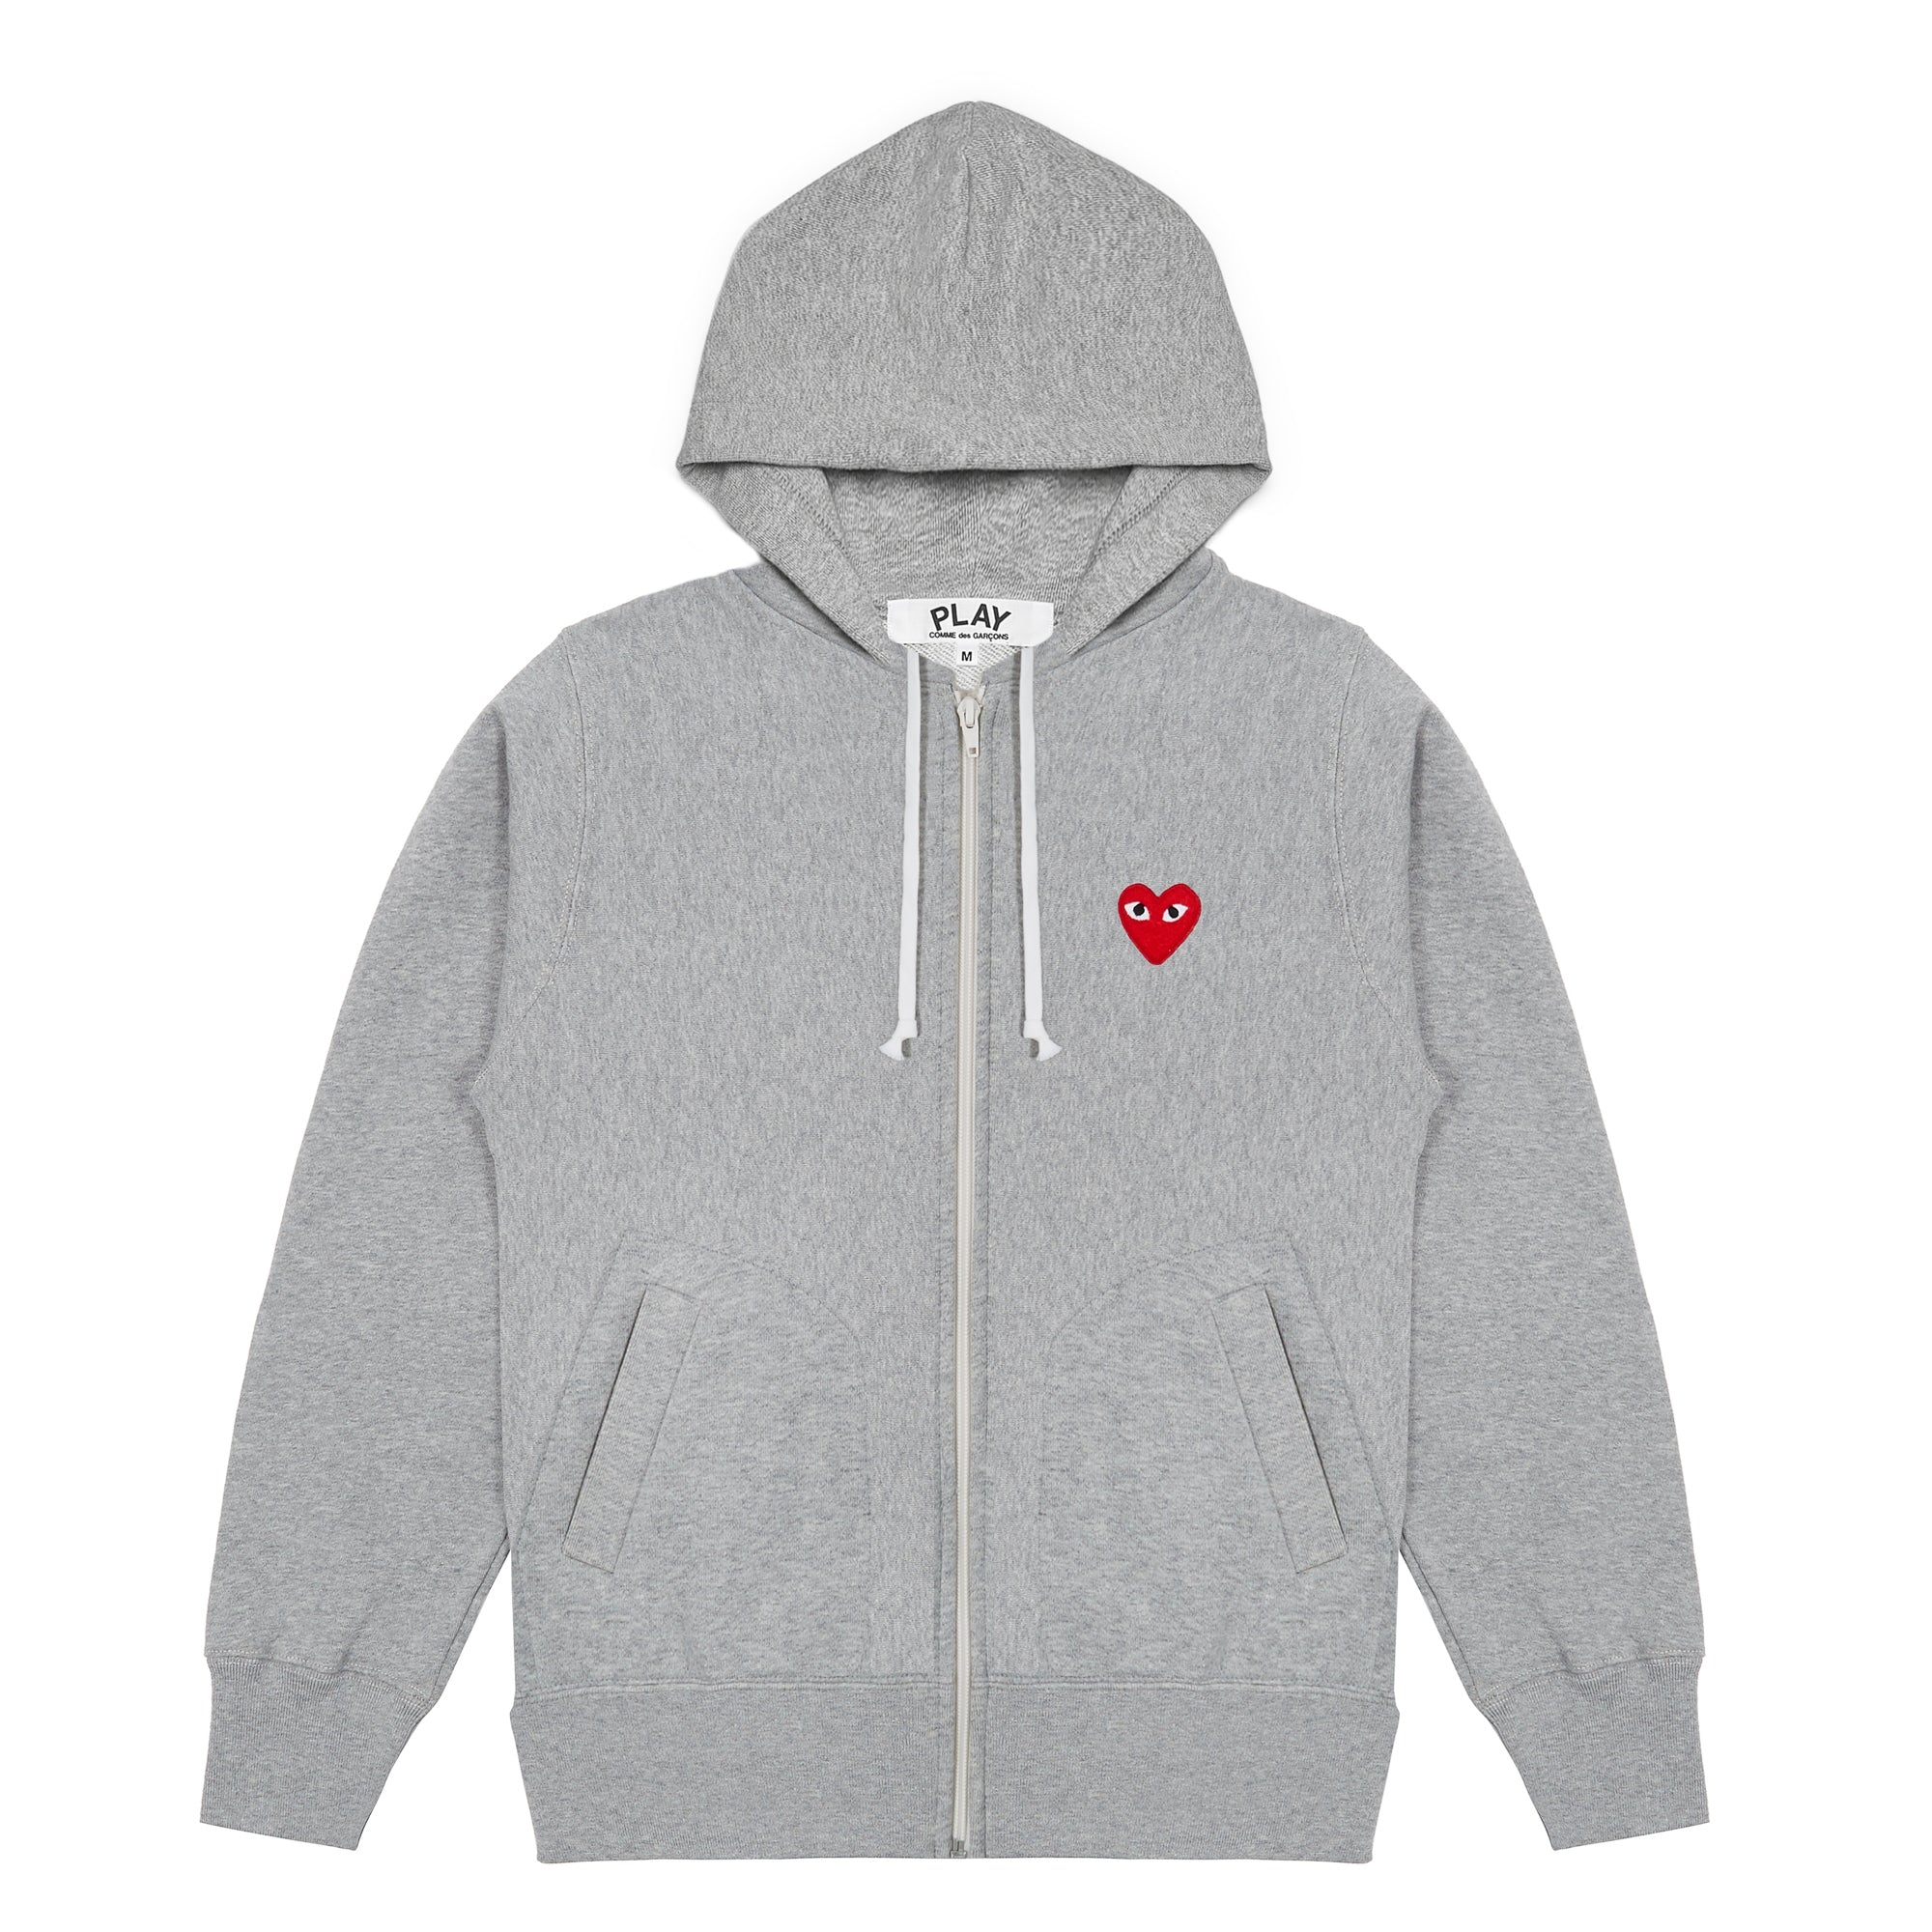 PLAY CDG - Hooded Sweatshirt With 5 Hearts - (Grey) view 2